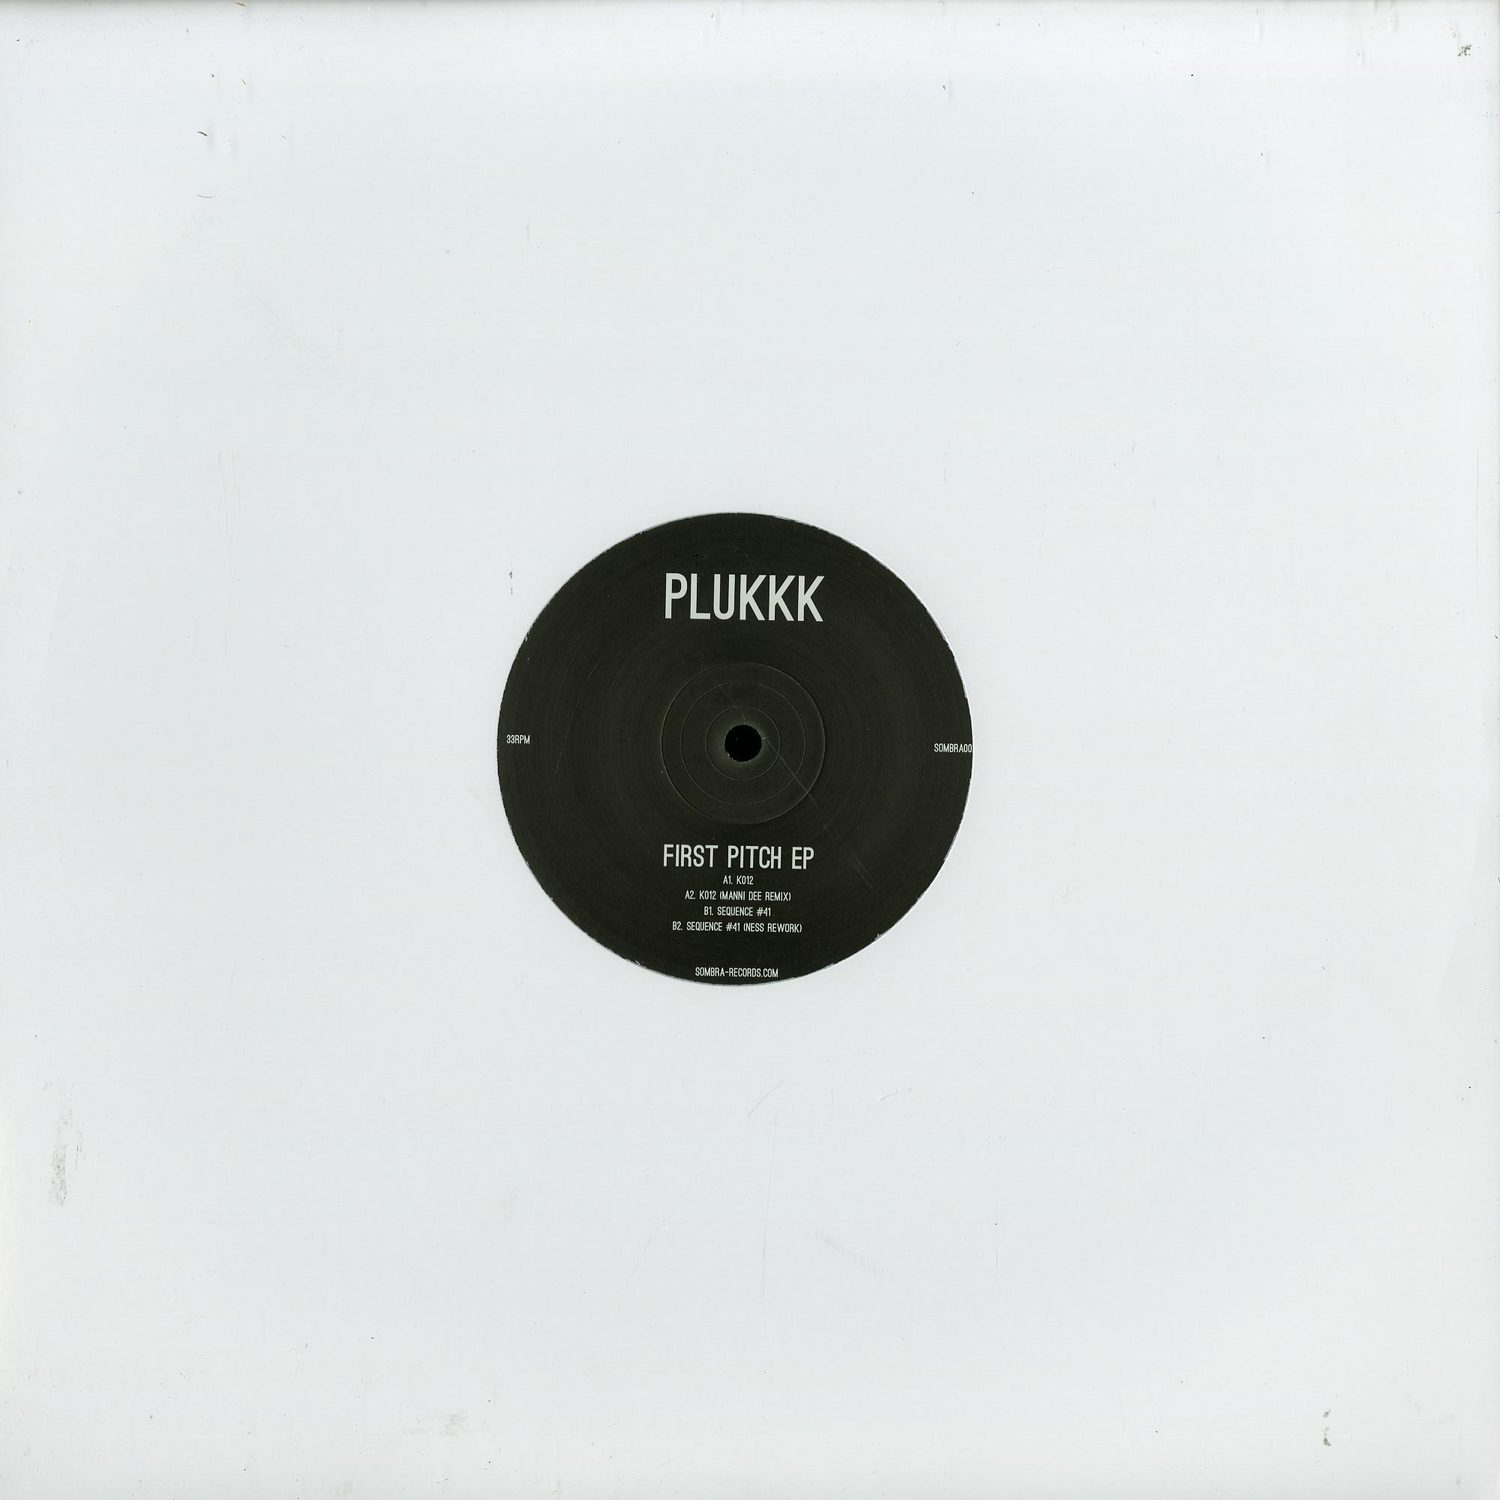 Plukkk - FIRST PITCH EP